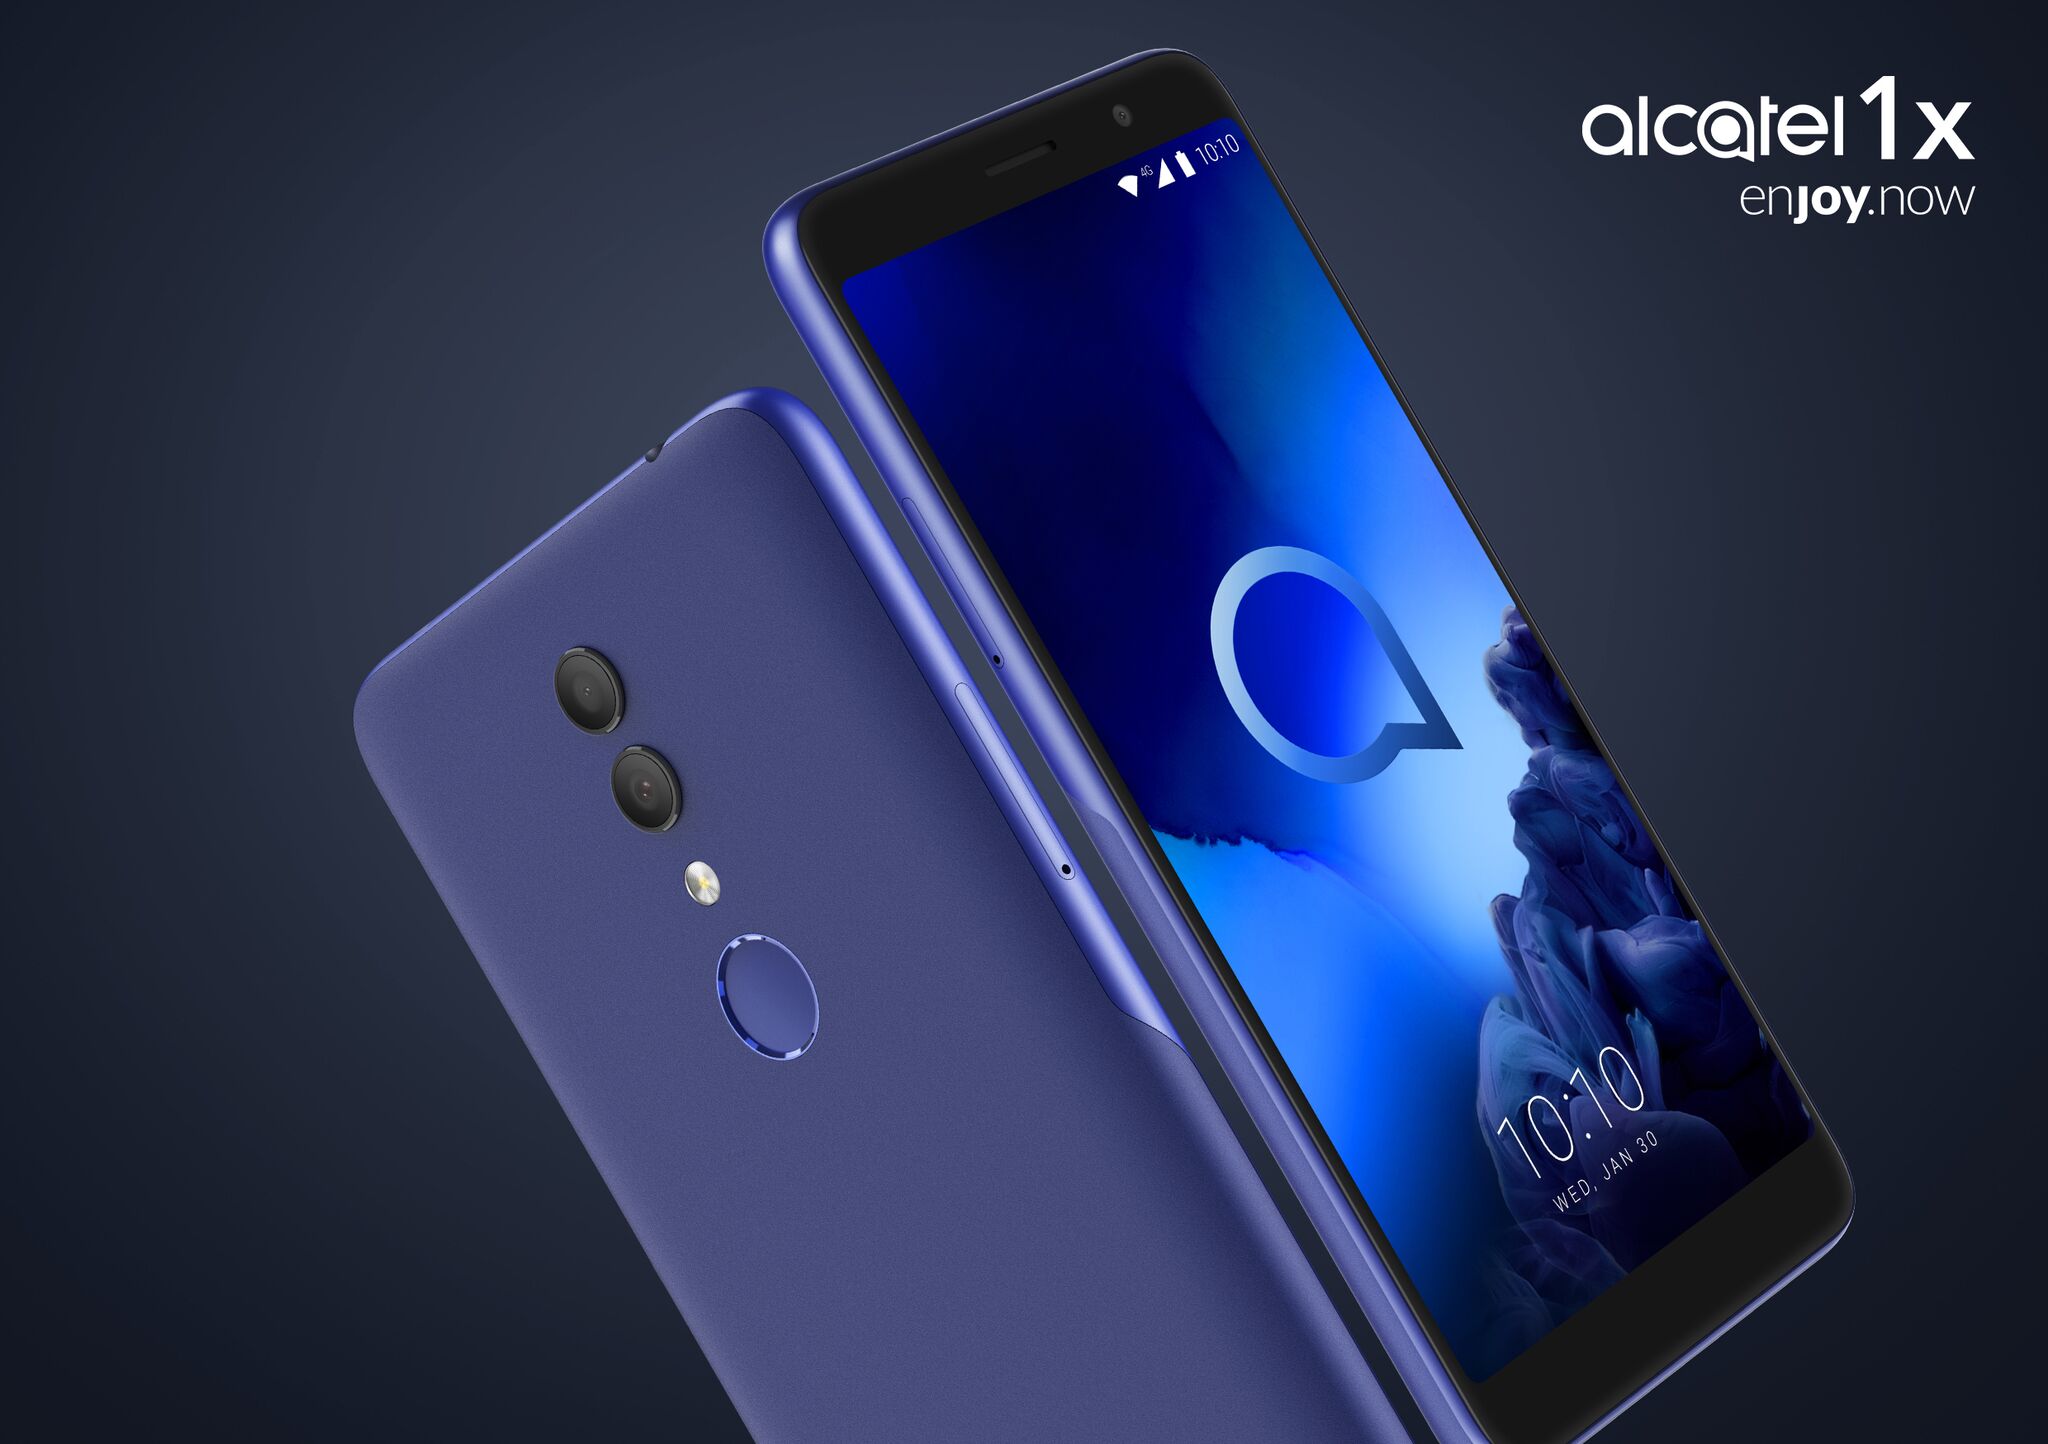 Alcatel 1c 2019 And Alcatel 1x 2019 Announced At Ces 2019 With One